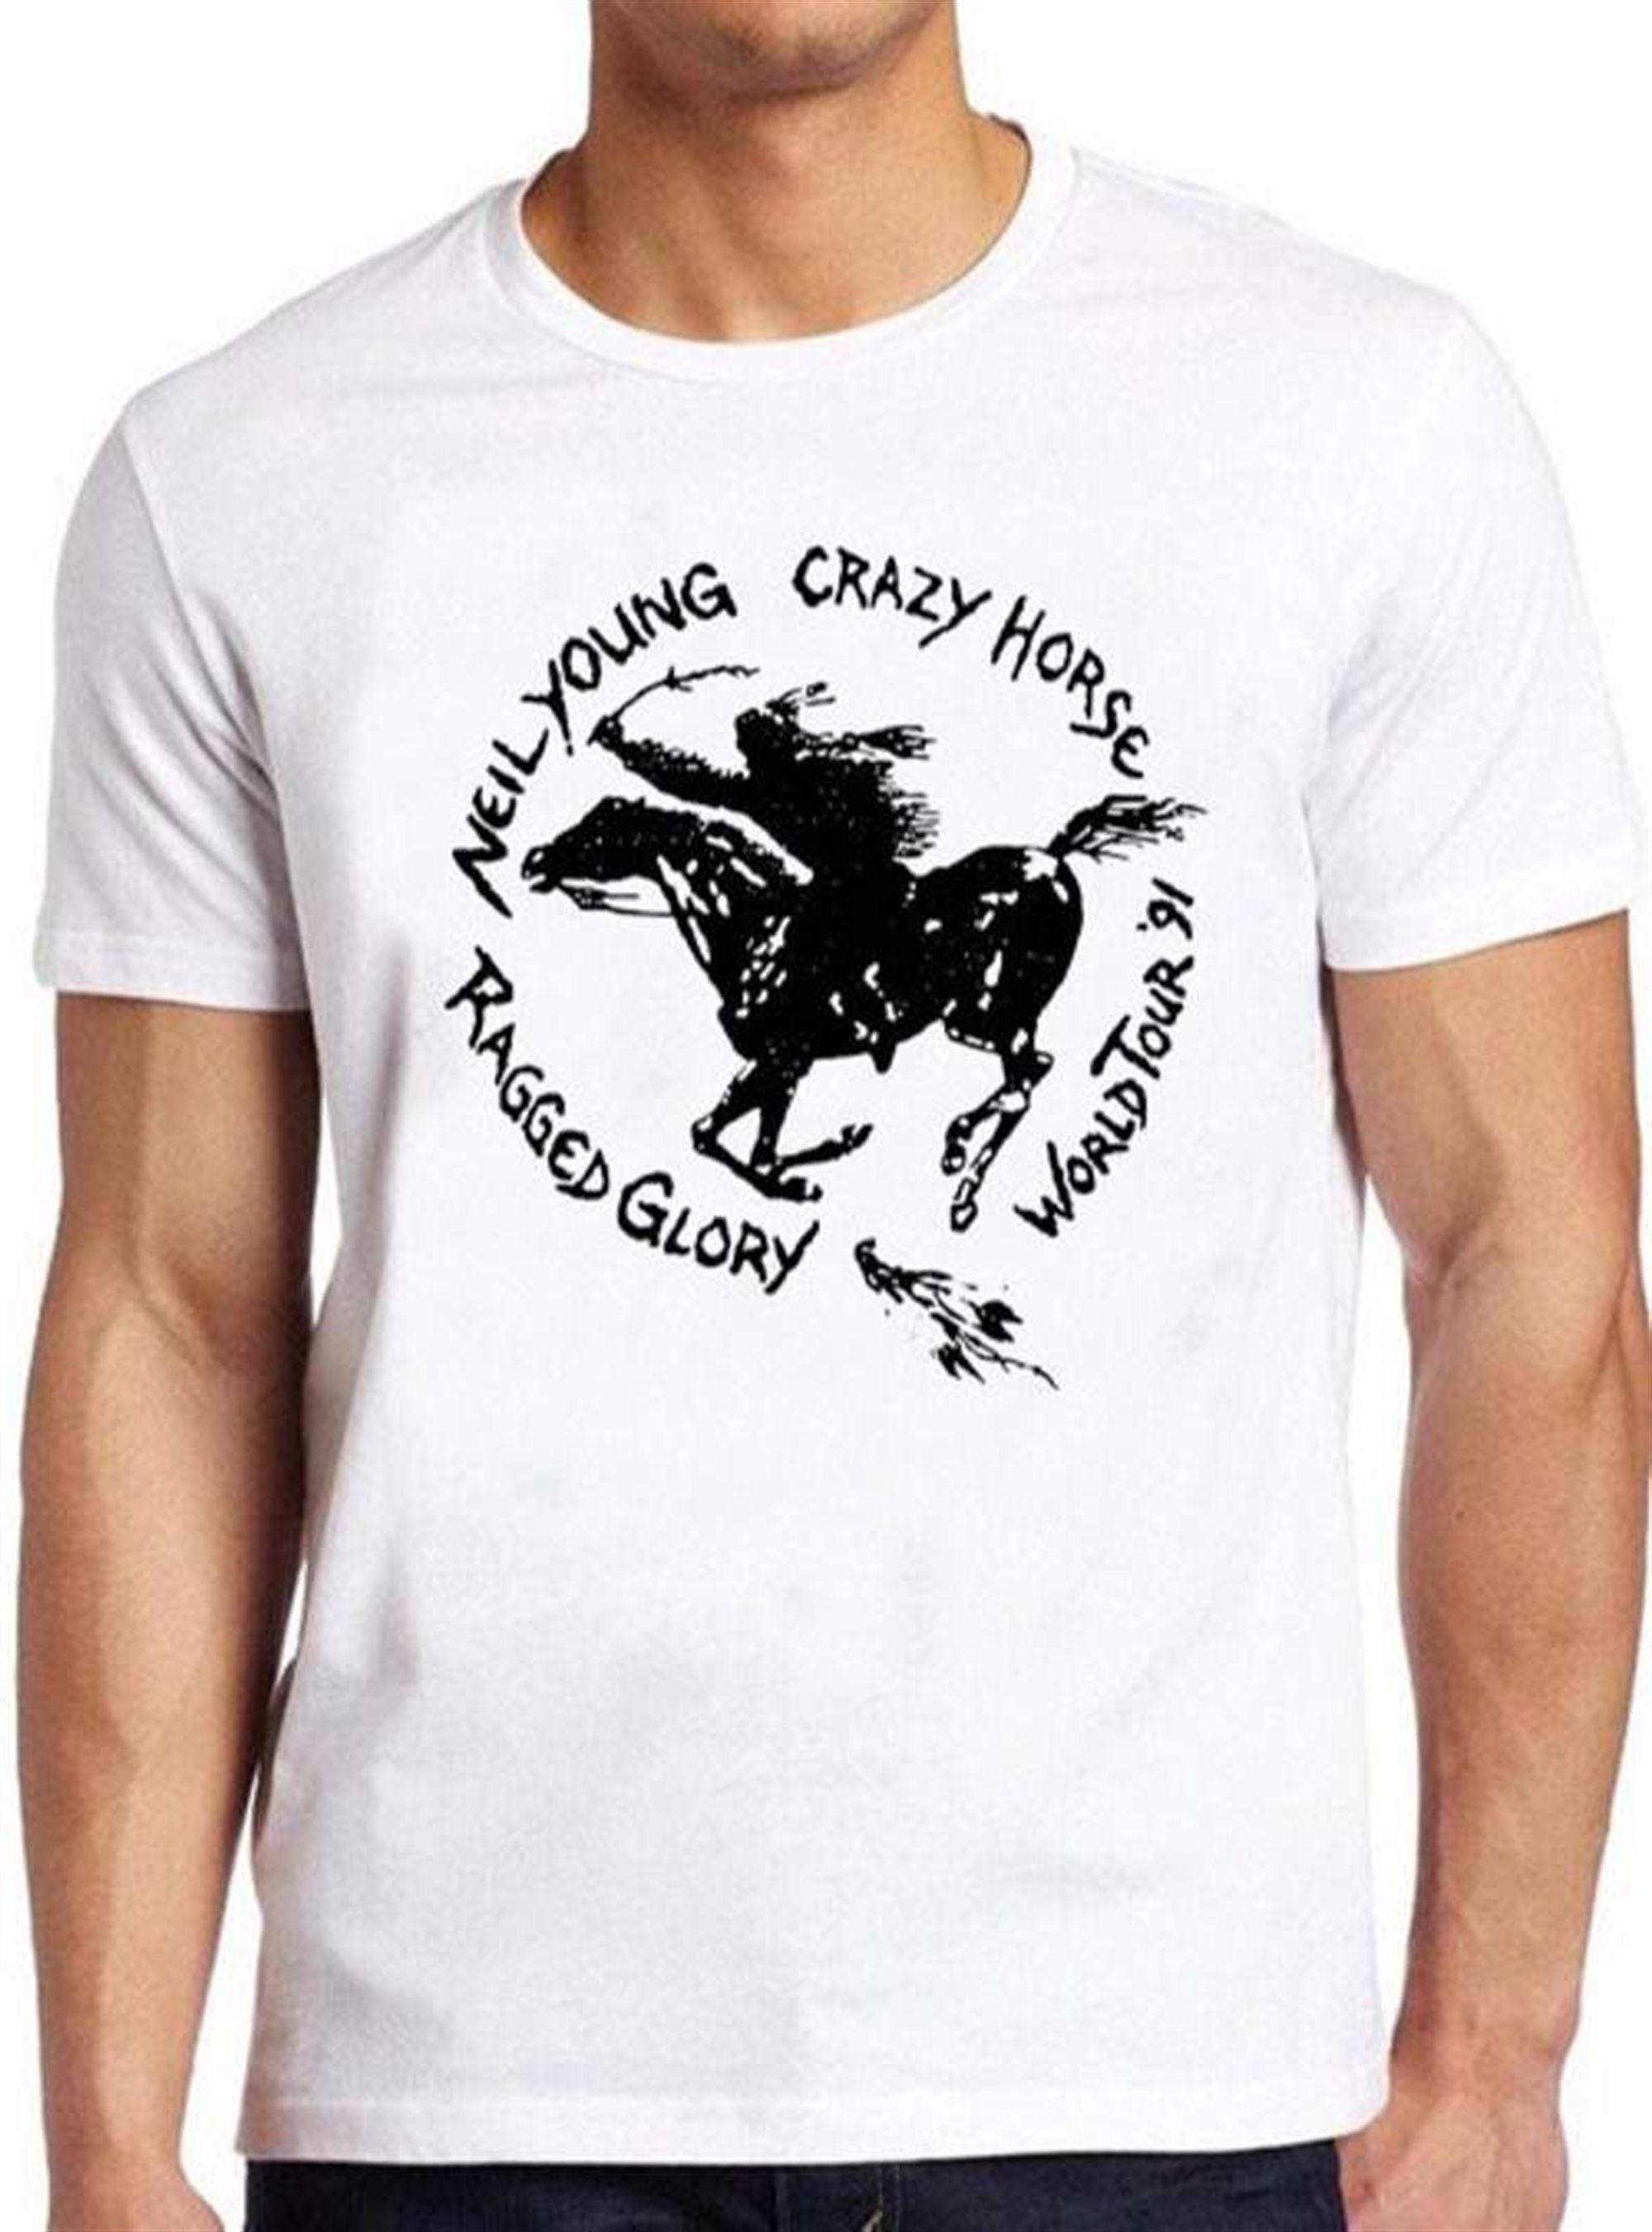 Neil Young Crazy Horse T Shirt Size Up To 5xl